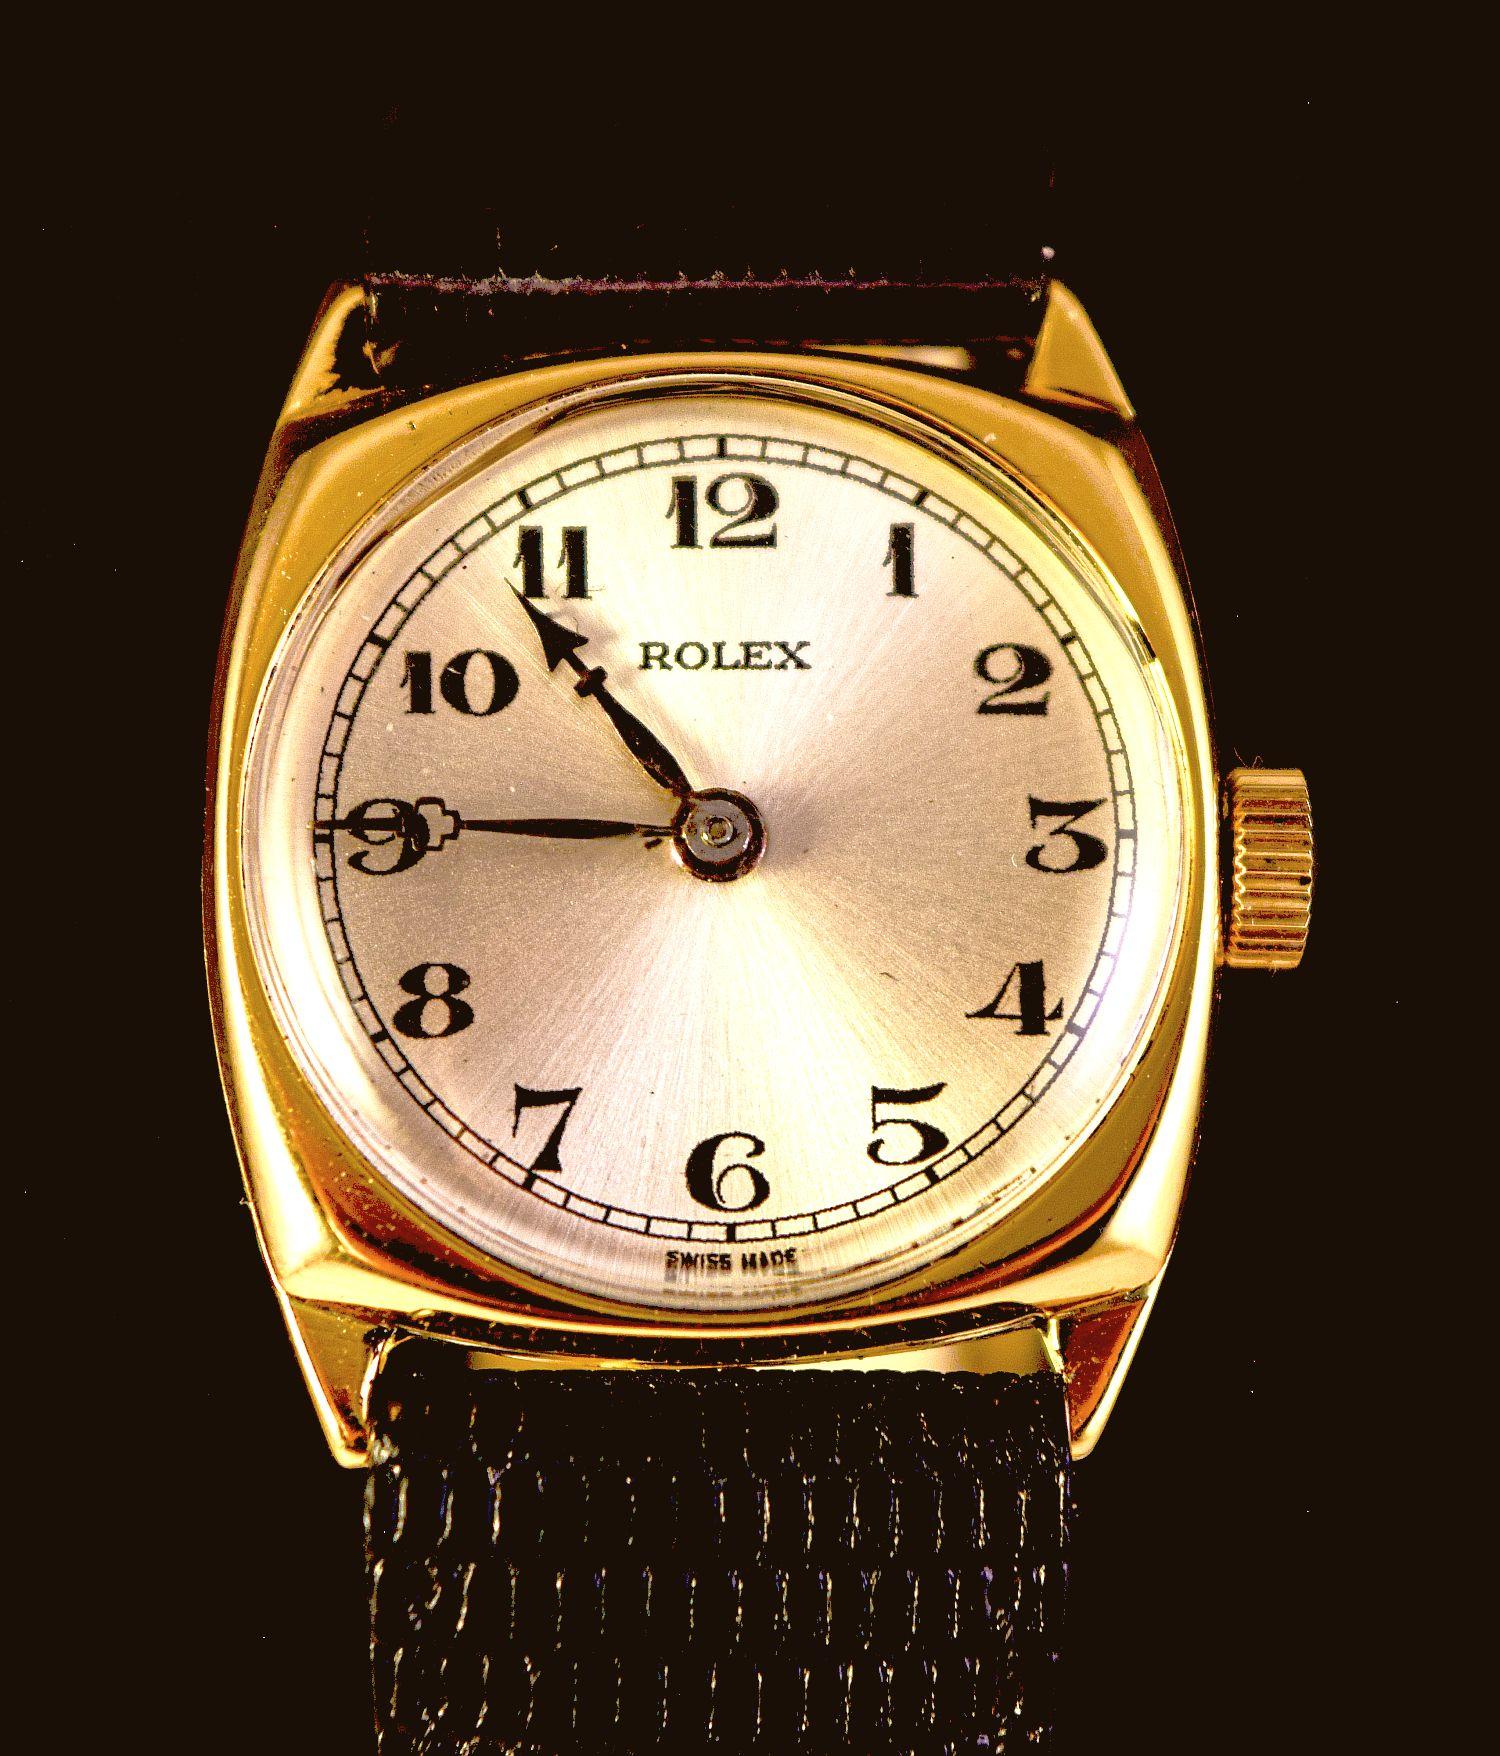 Rolex Vintage rare cushion shaped watch For Sale 1